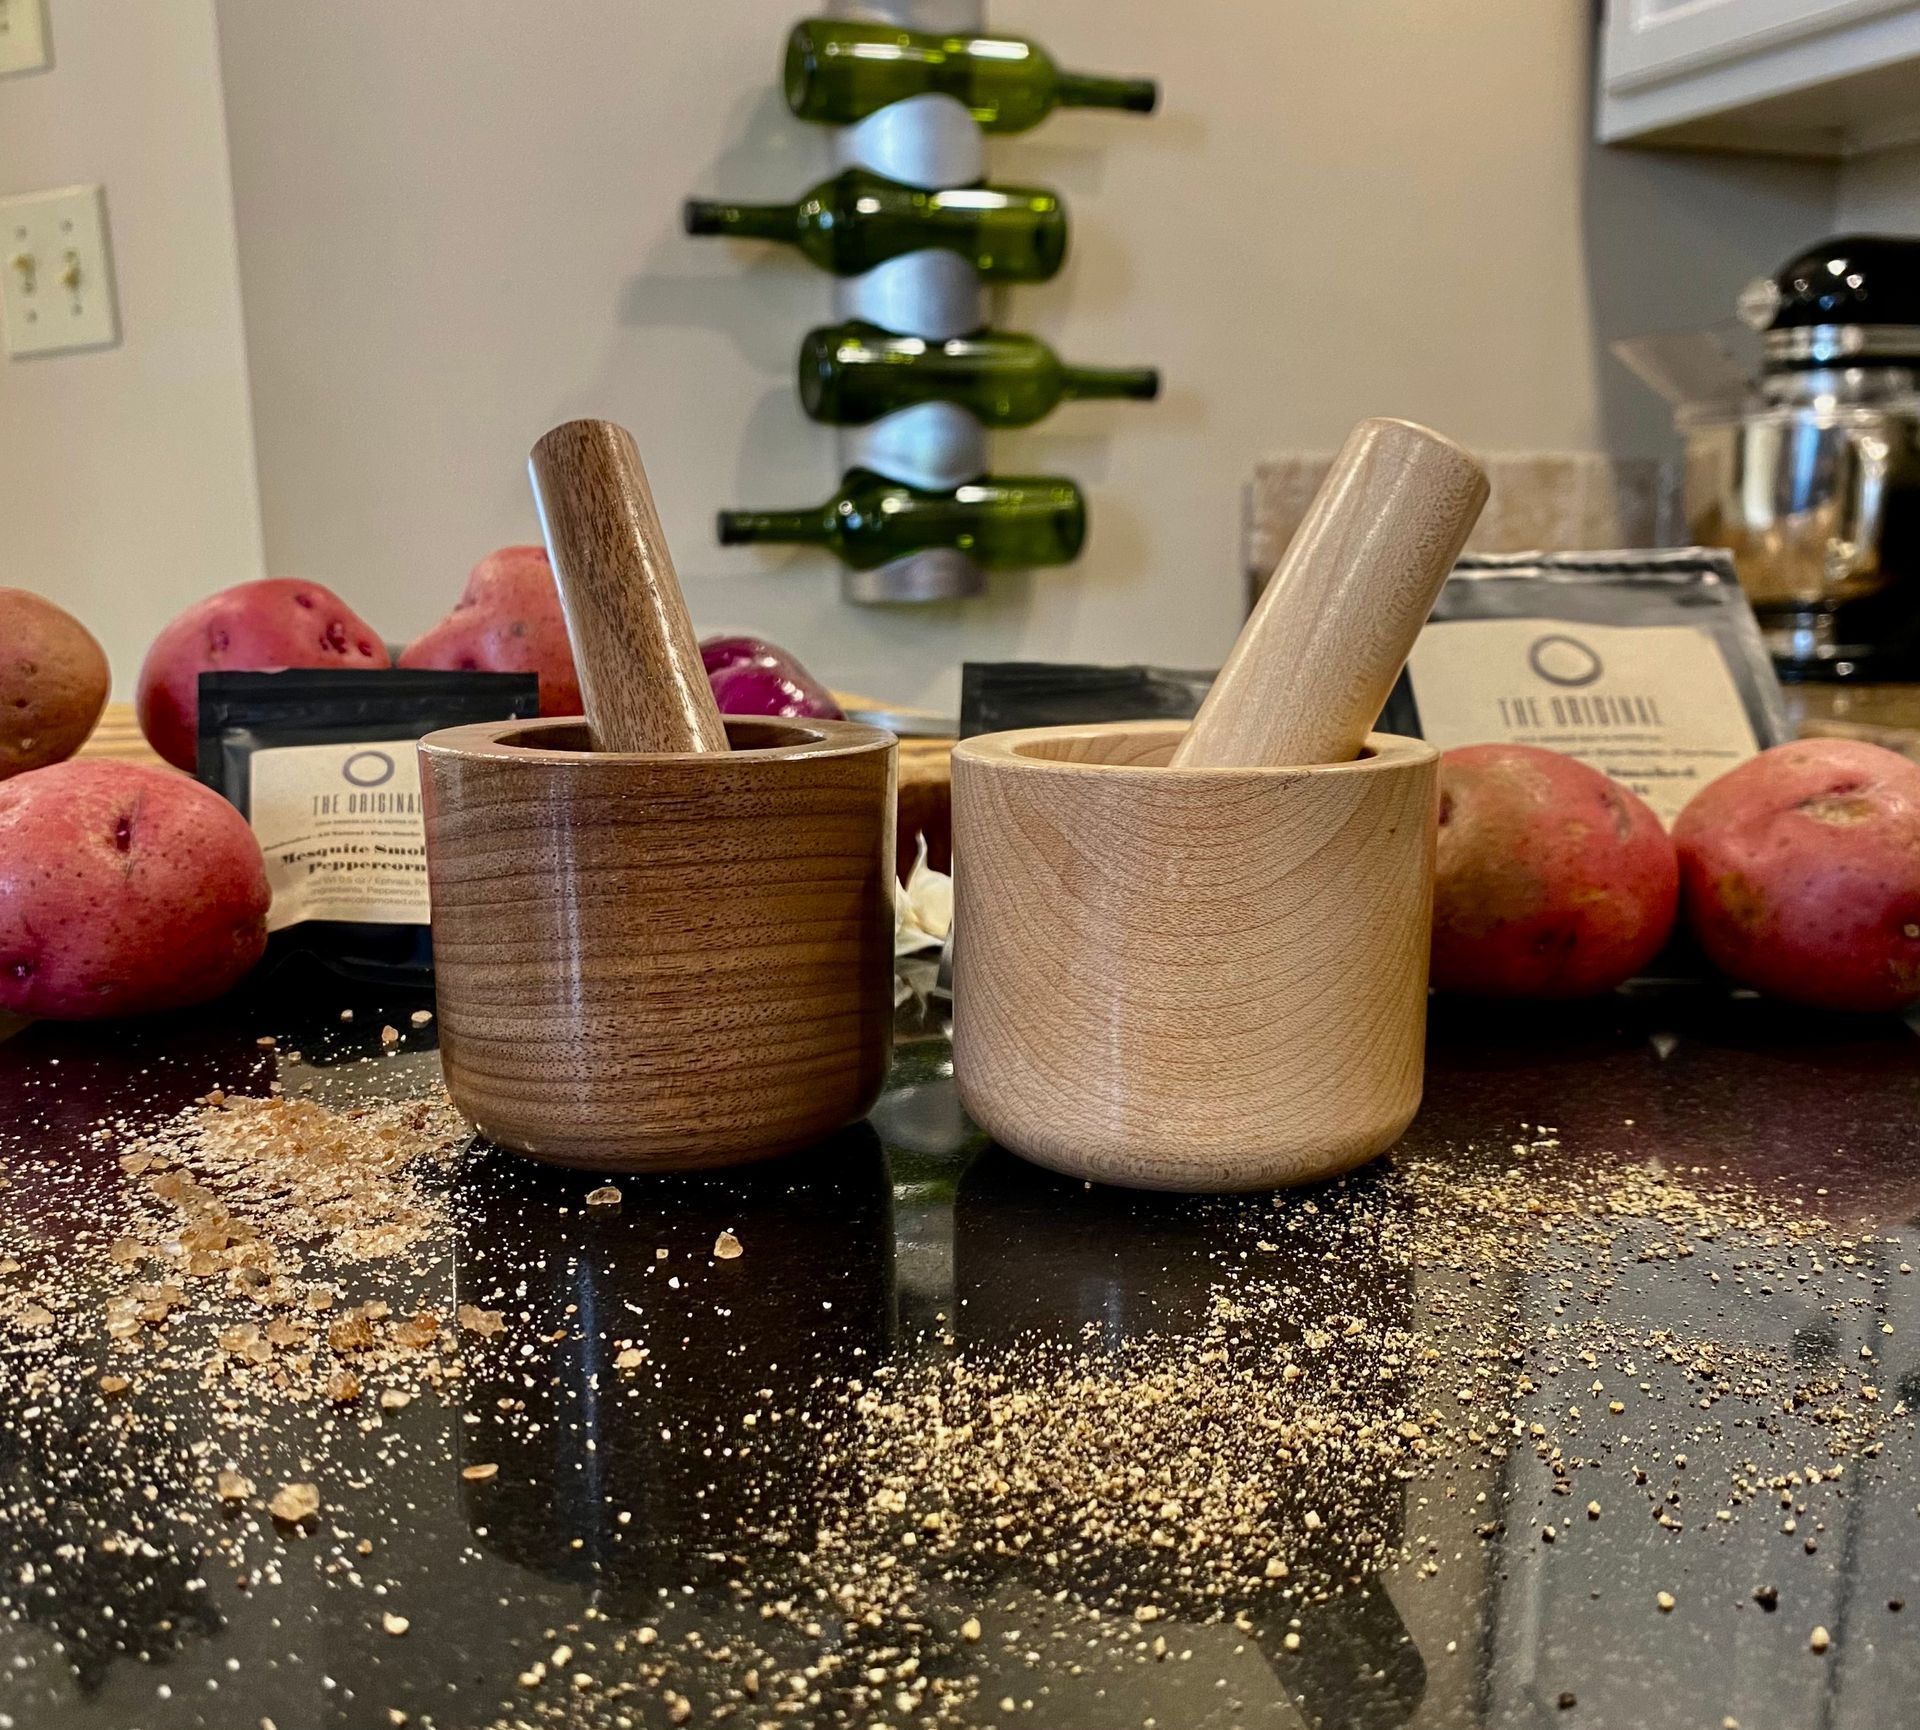 two mortar and pestles on a counter with red potatoes and seasoning packets and ground pepper sprinkled on the counter